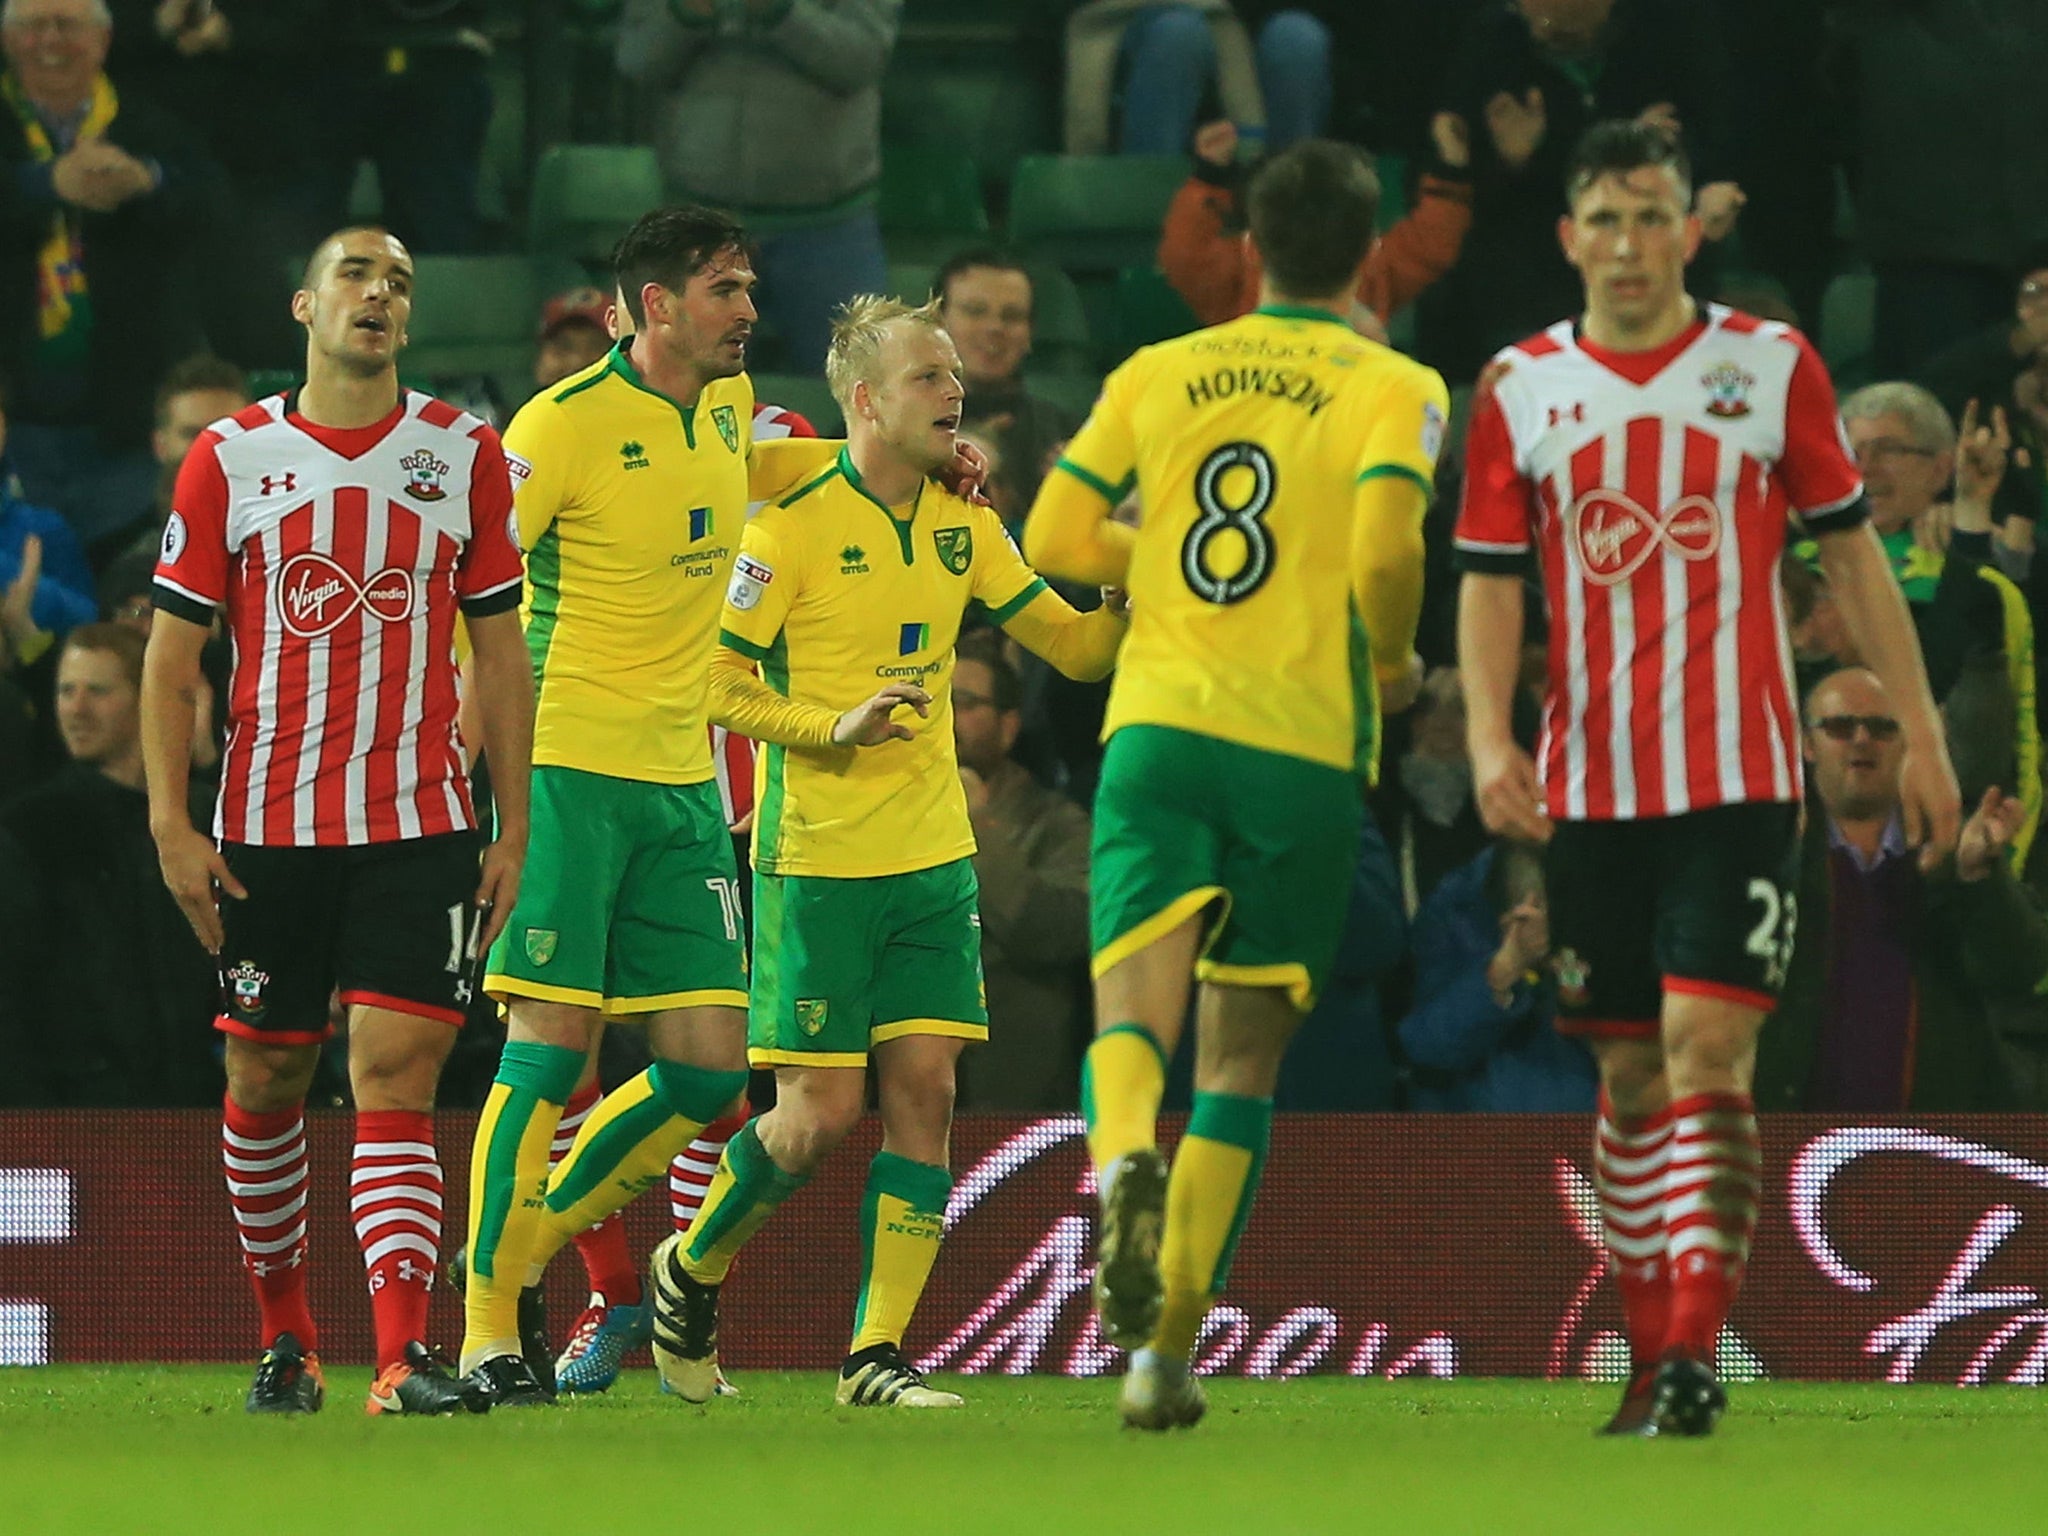 Steven Naismith's late equaliser secured a trip to the south coast for the Canaries